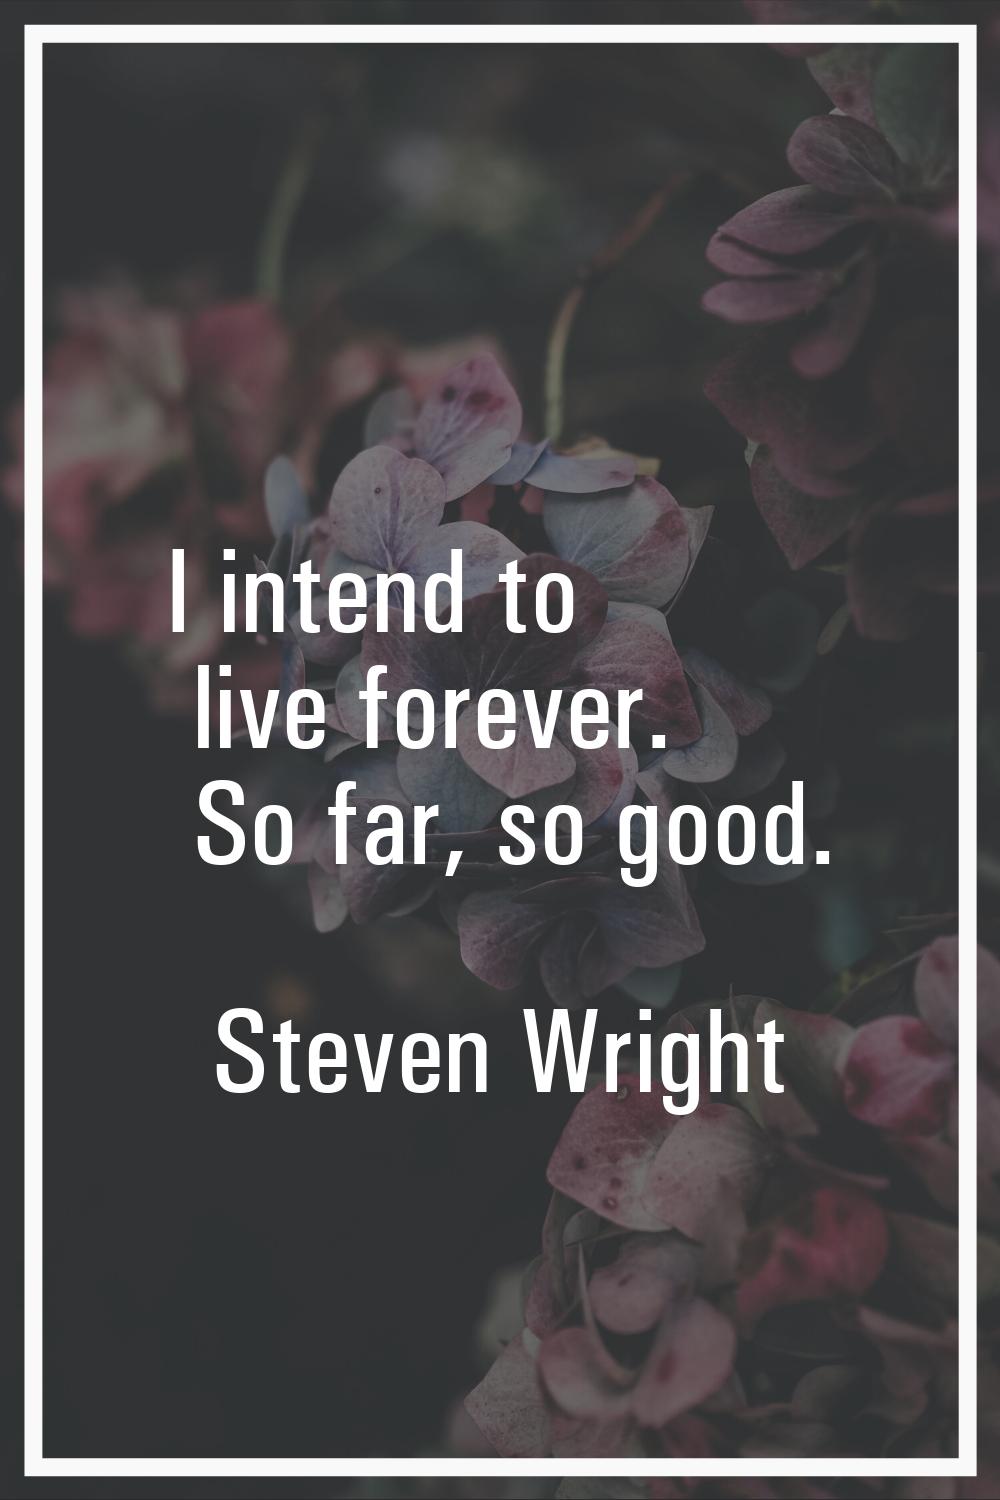 I intend to live forever. So far, so good.